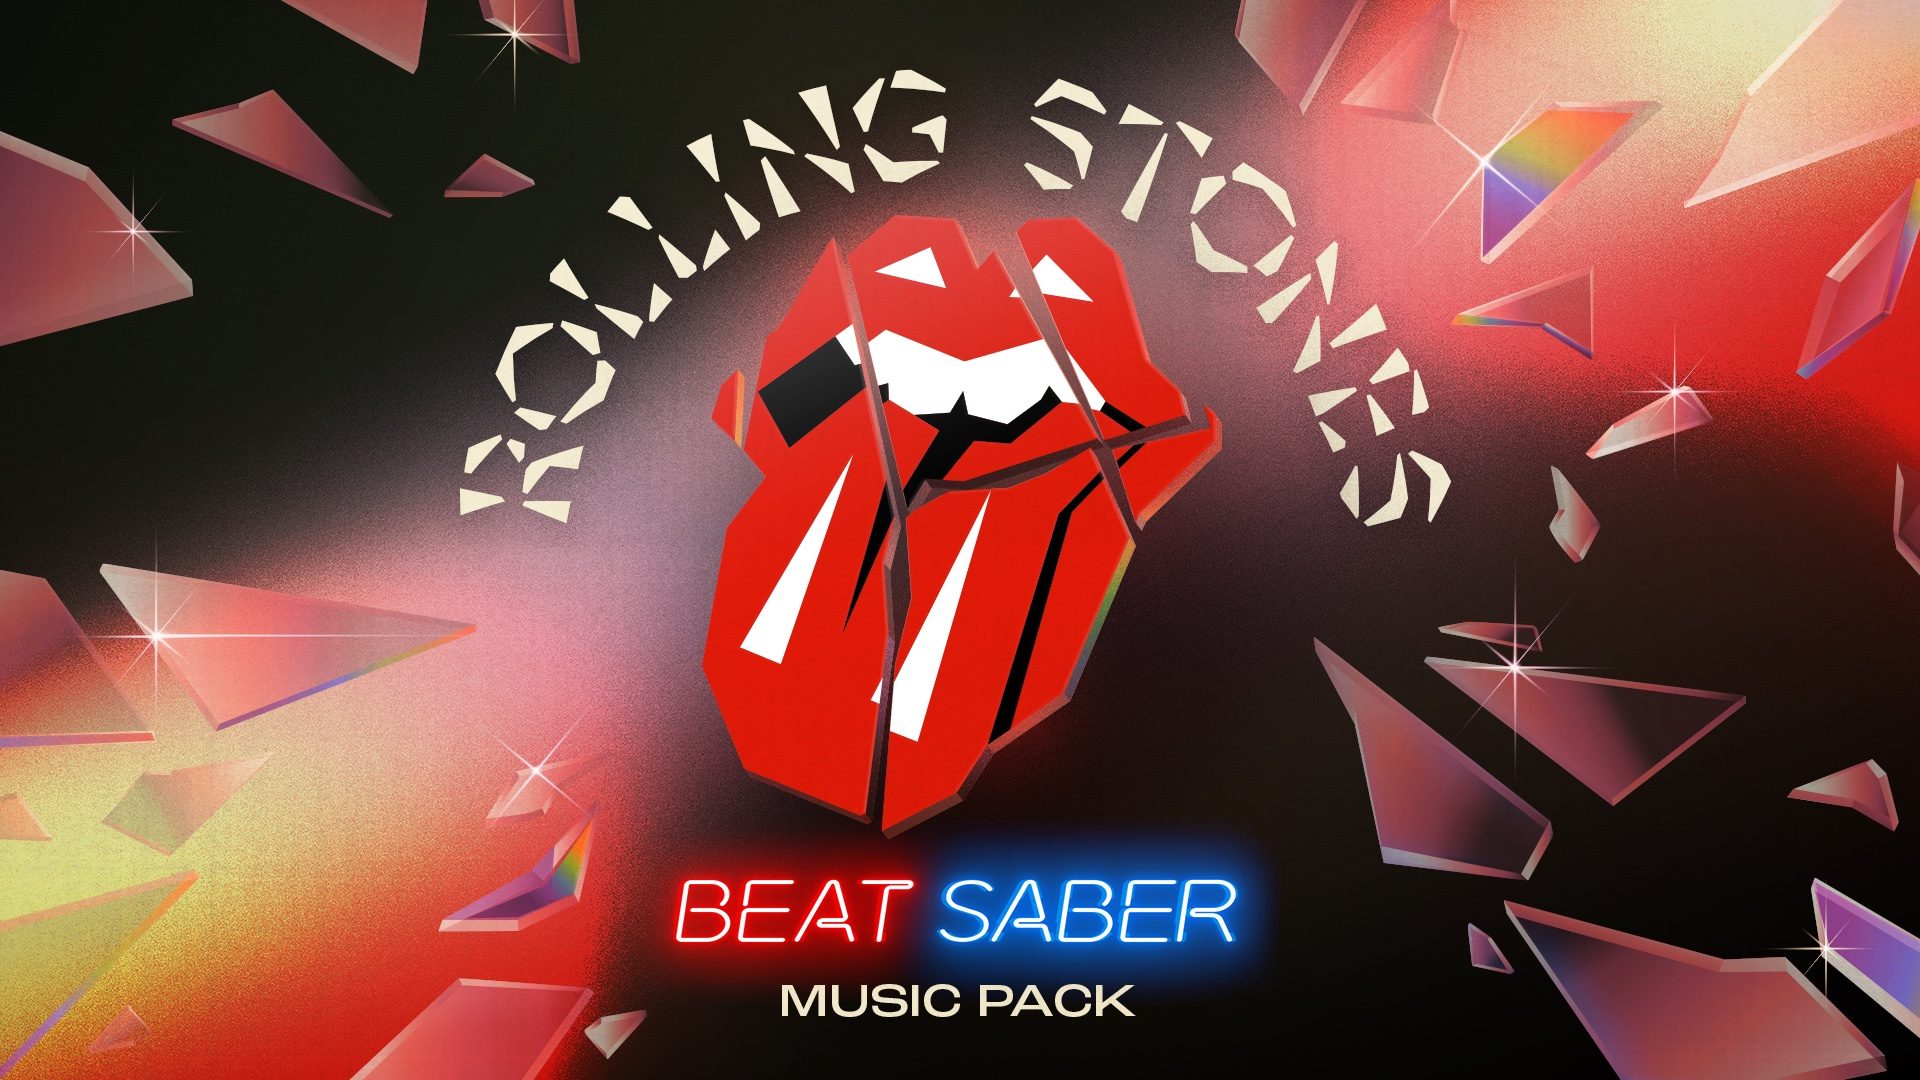 Rock out to The Rolling Stones, now on Beat Saber